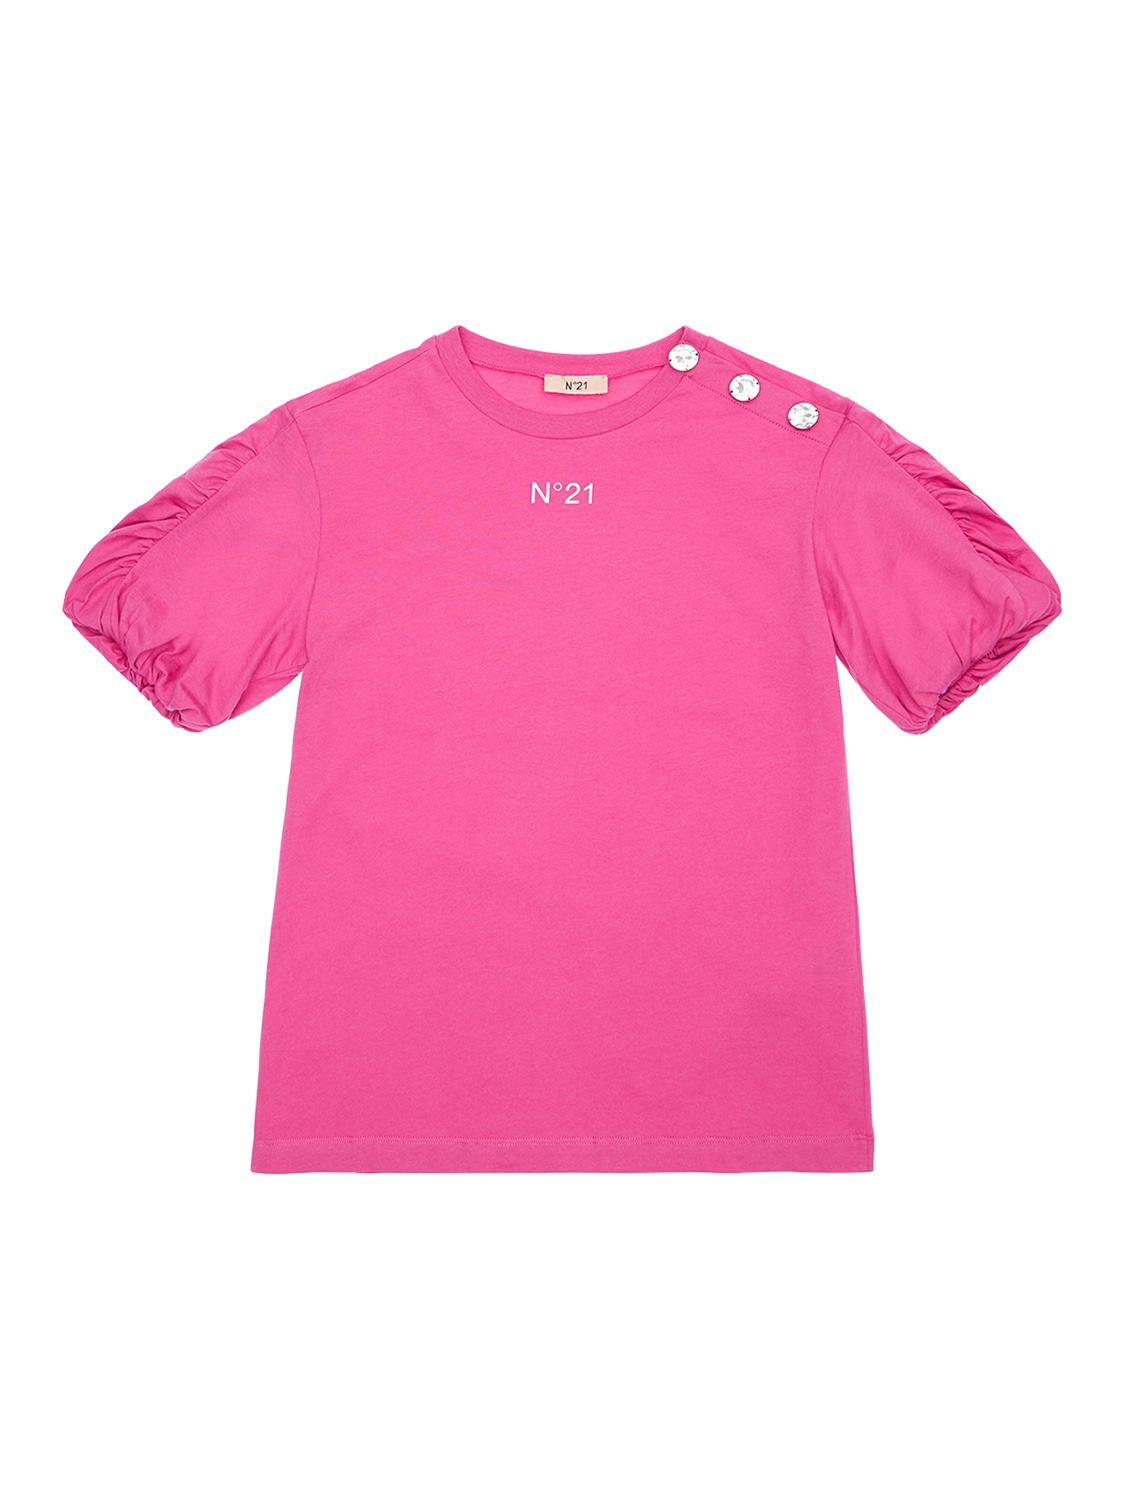 N°21 EMBELLISHED COTTON JERSEY T-SHIRT,72IOES014-ME4ZMDU1